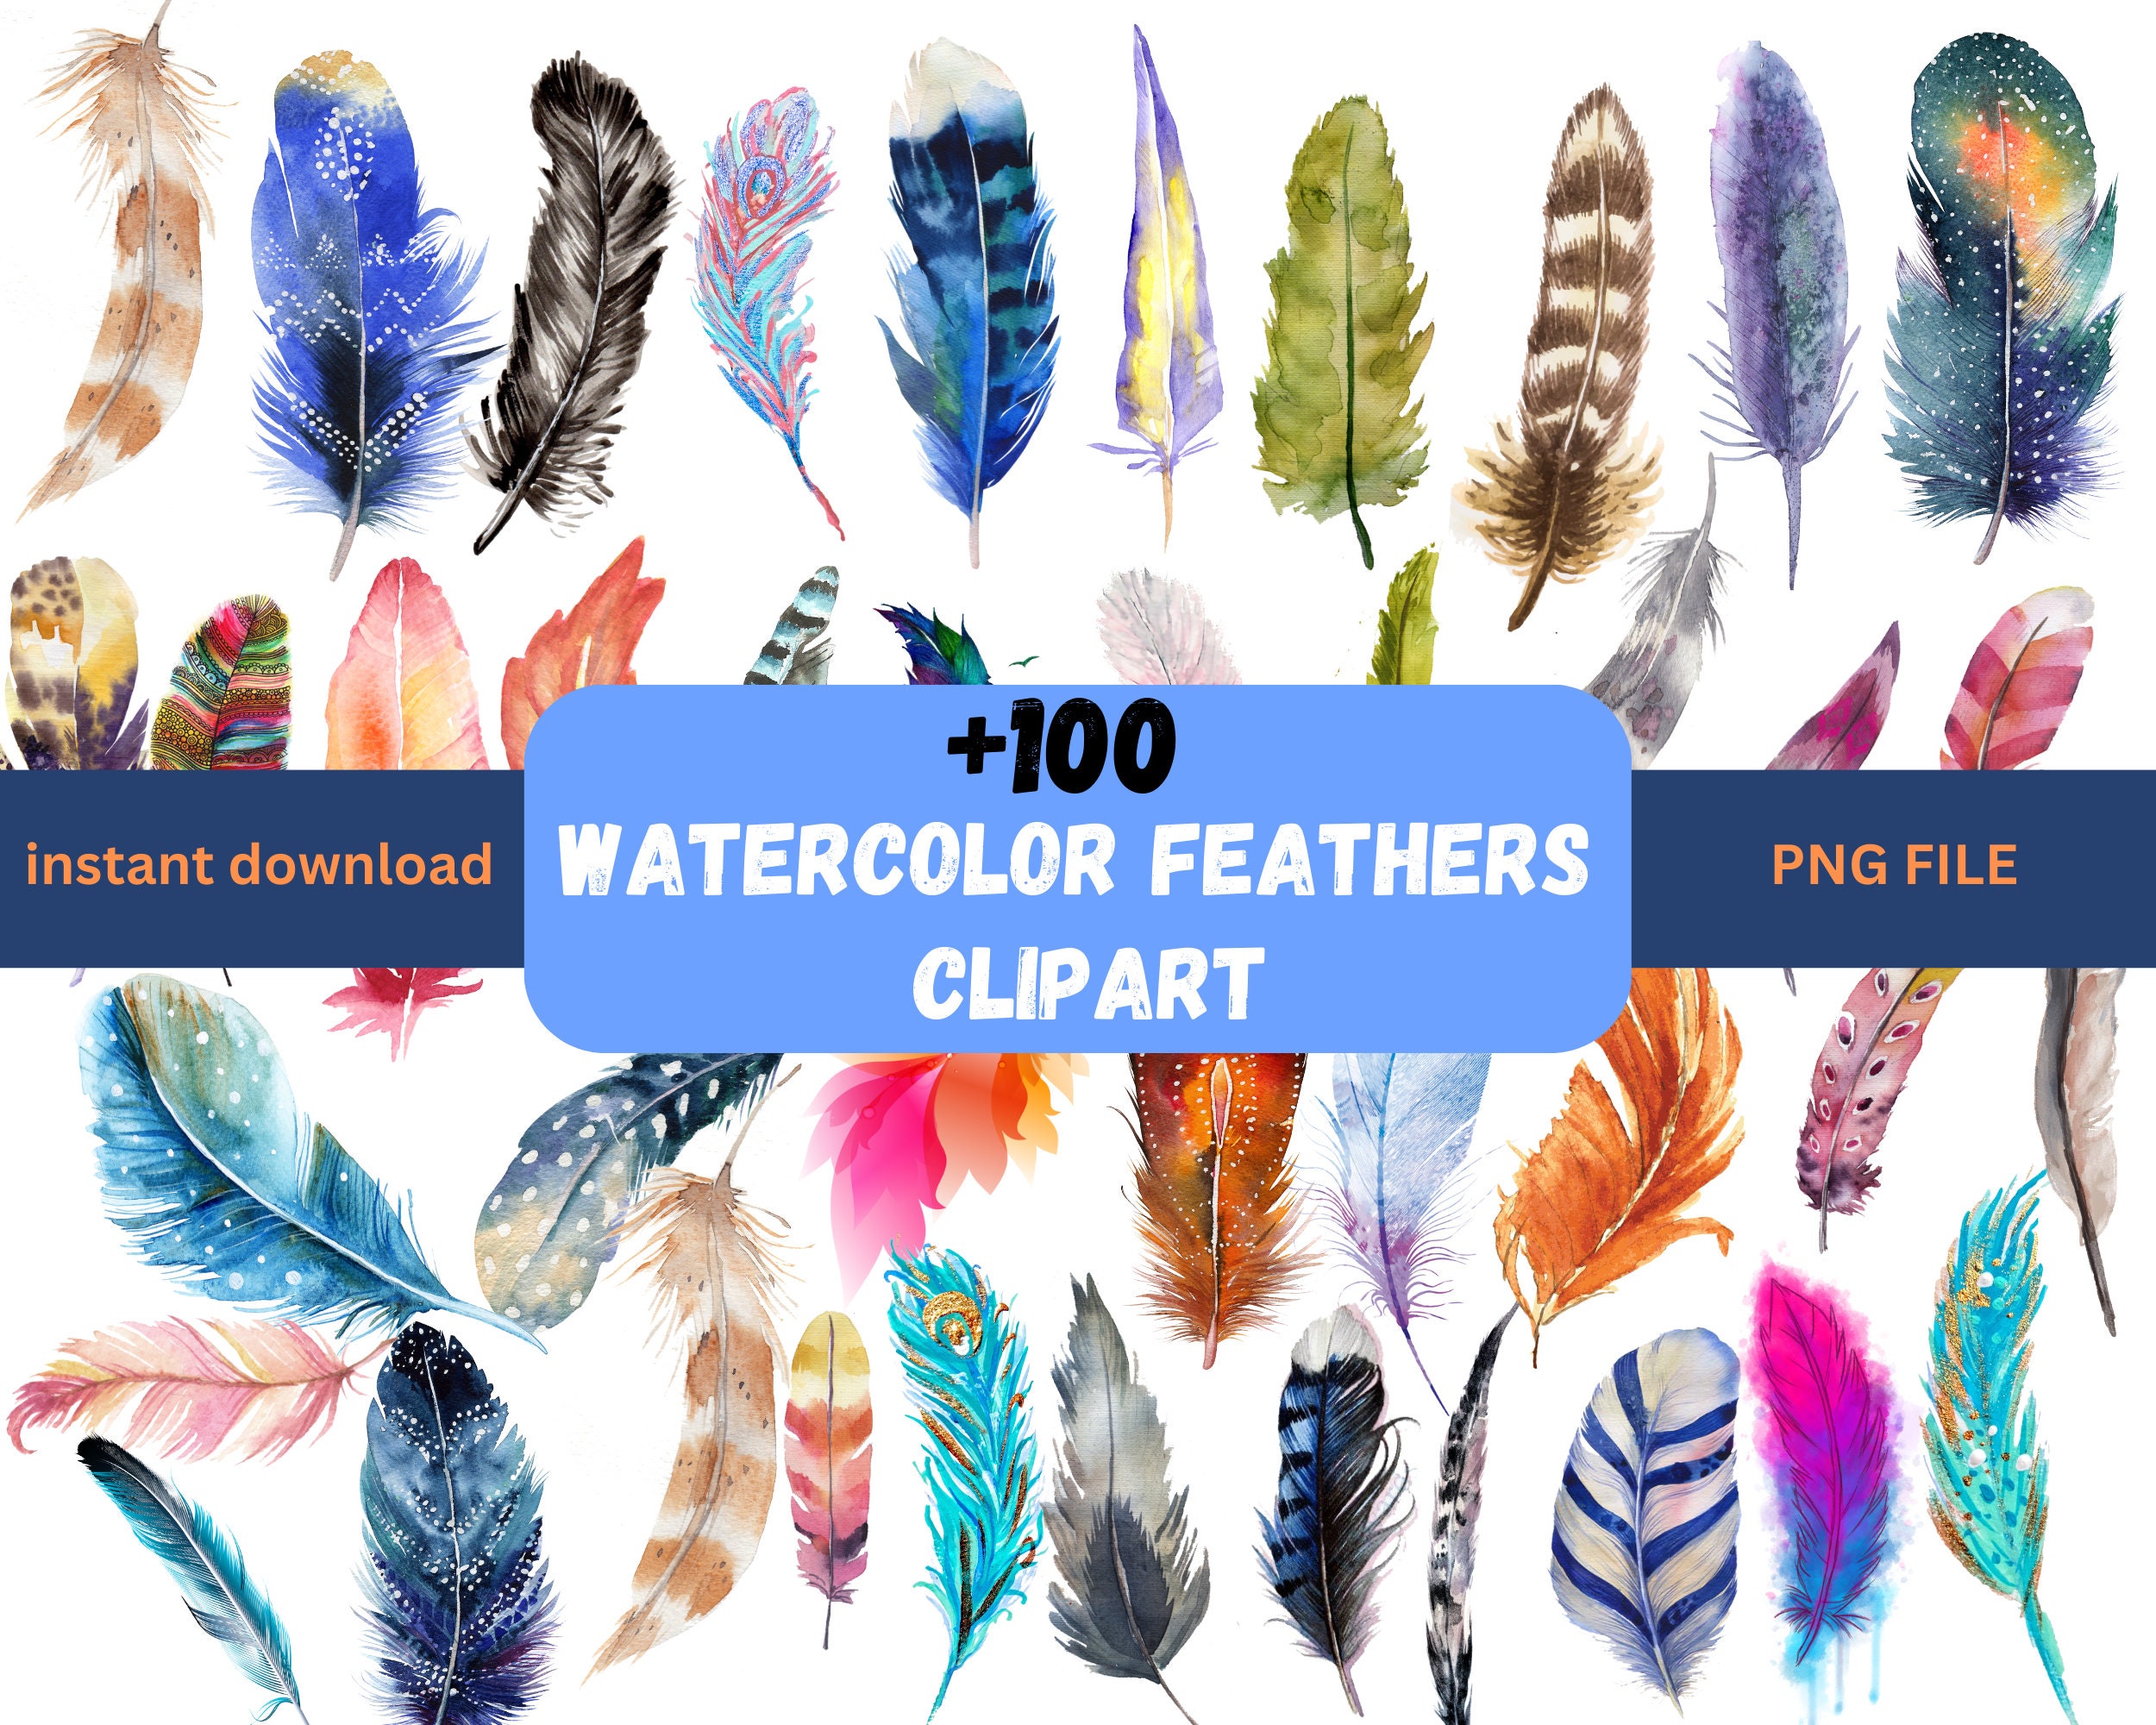 Bulk Feathers Assortment, 600 Brightly colored feathers, Bulk Feathers,  Bridal feathers, Embellishment Hat Feathers, Kids crafts